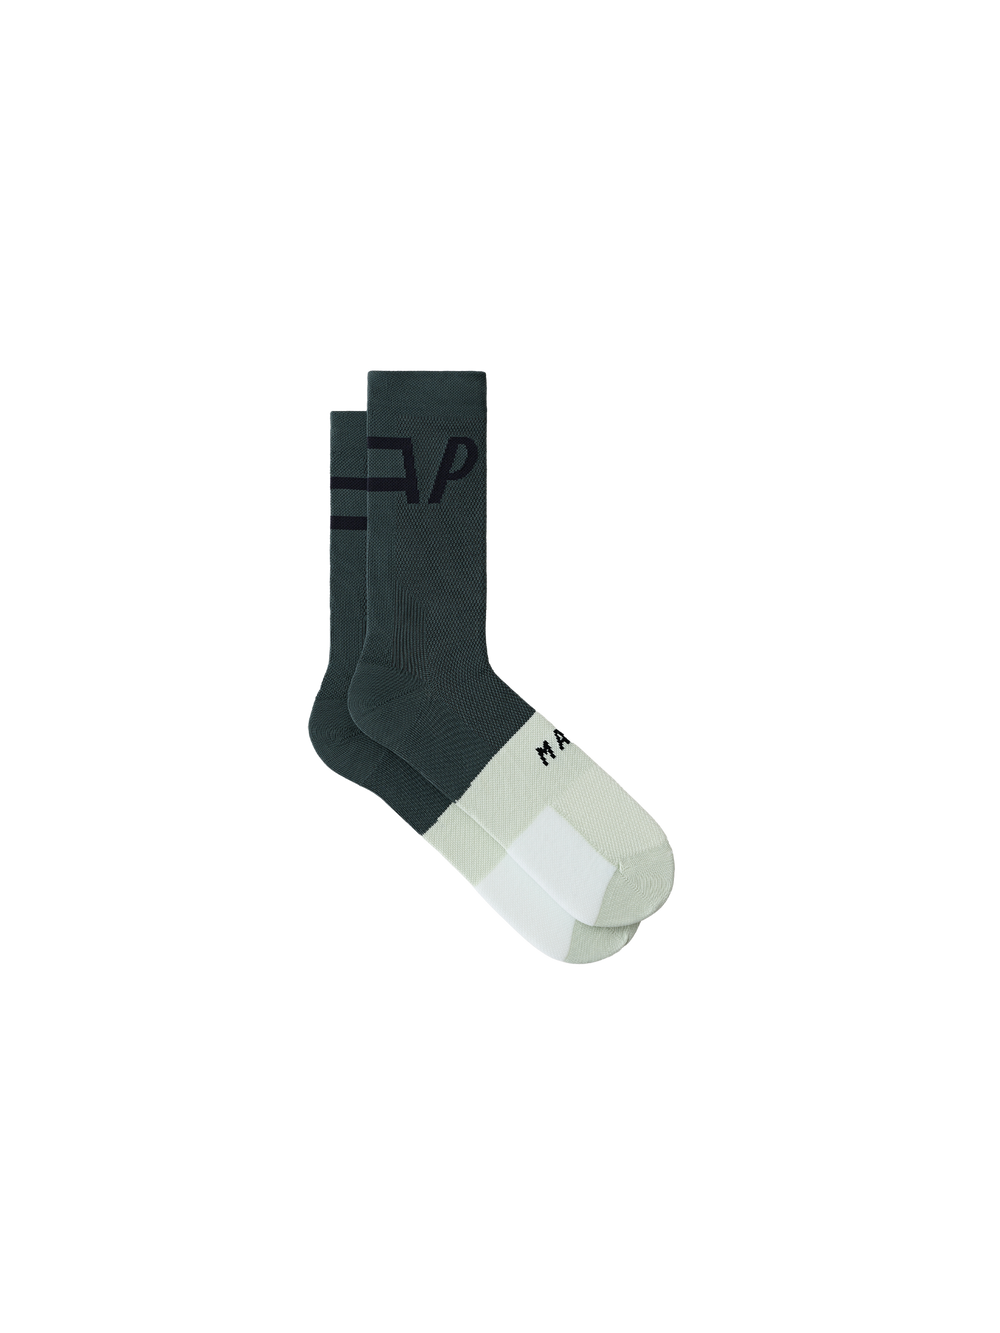 Product Image for Adapt Sock